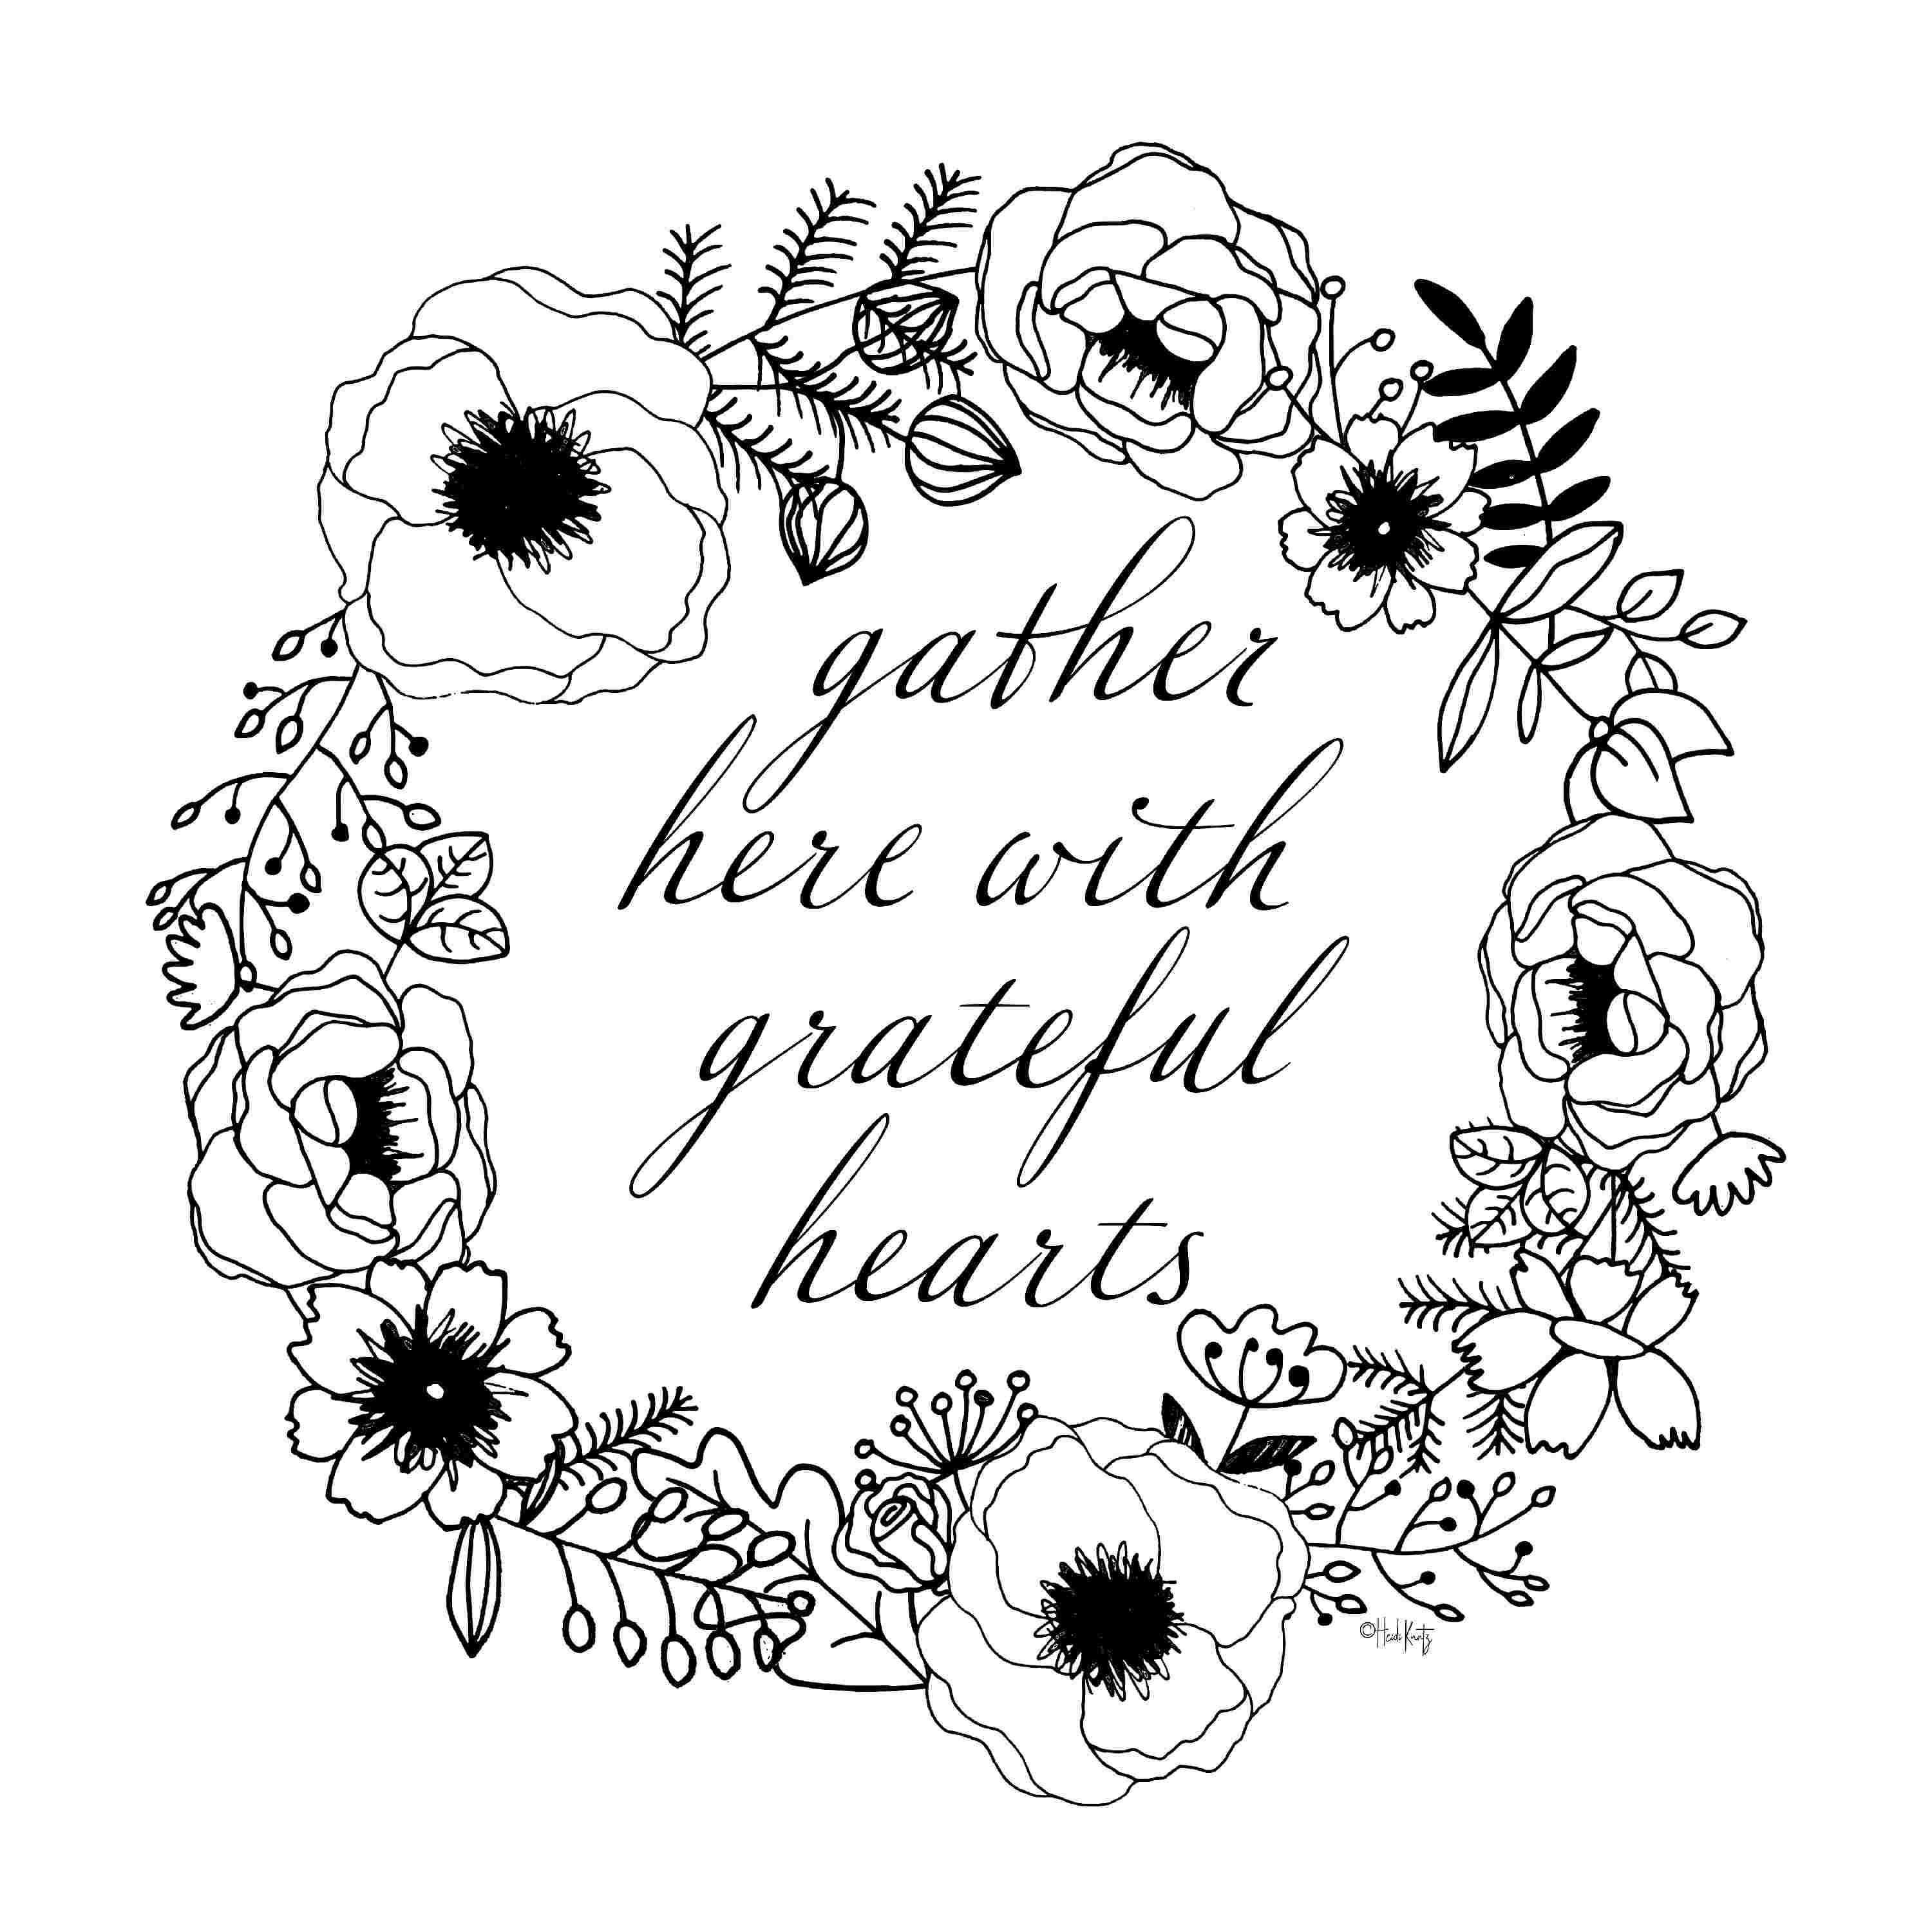 trinx-gather-here-with-grateful-hearts-on-canvas-by-heidi-kuntz-textual